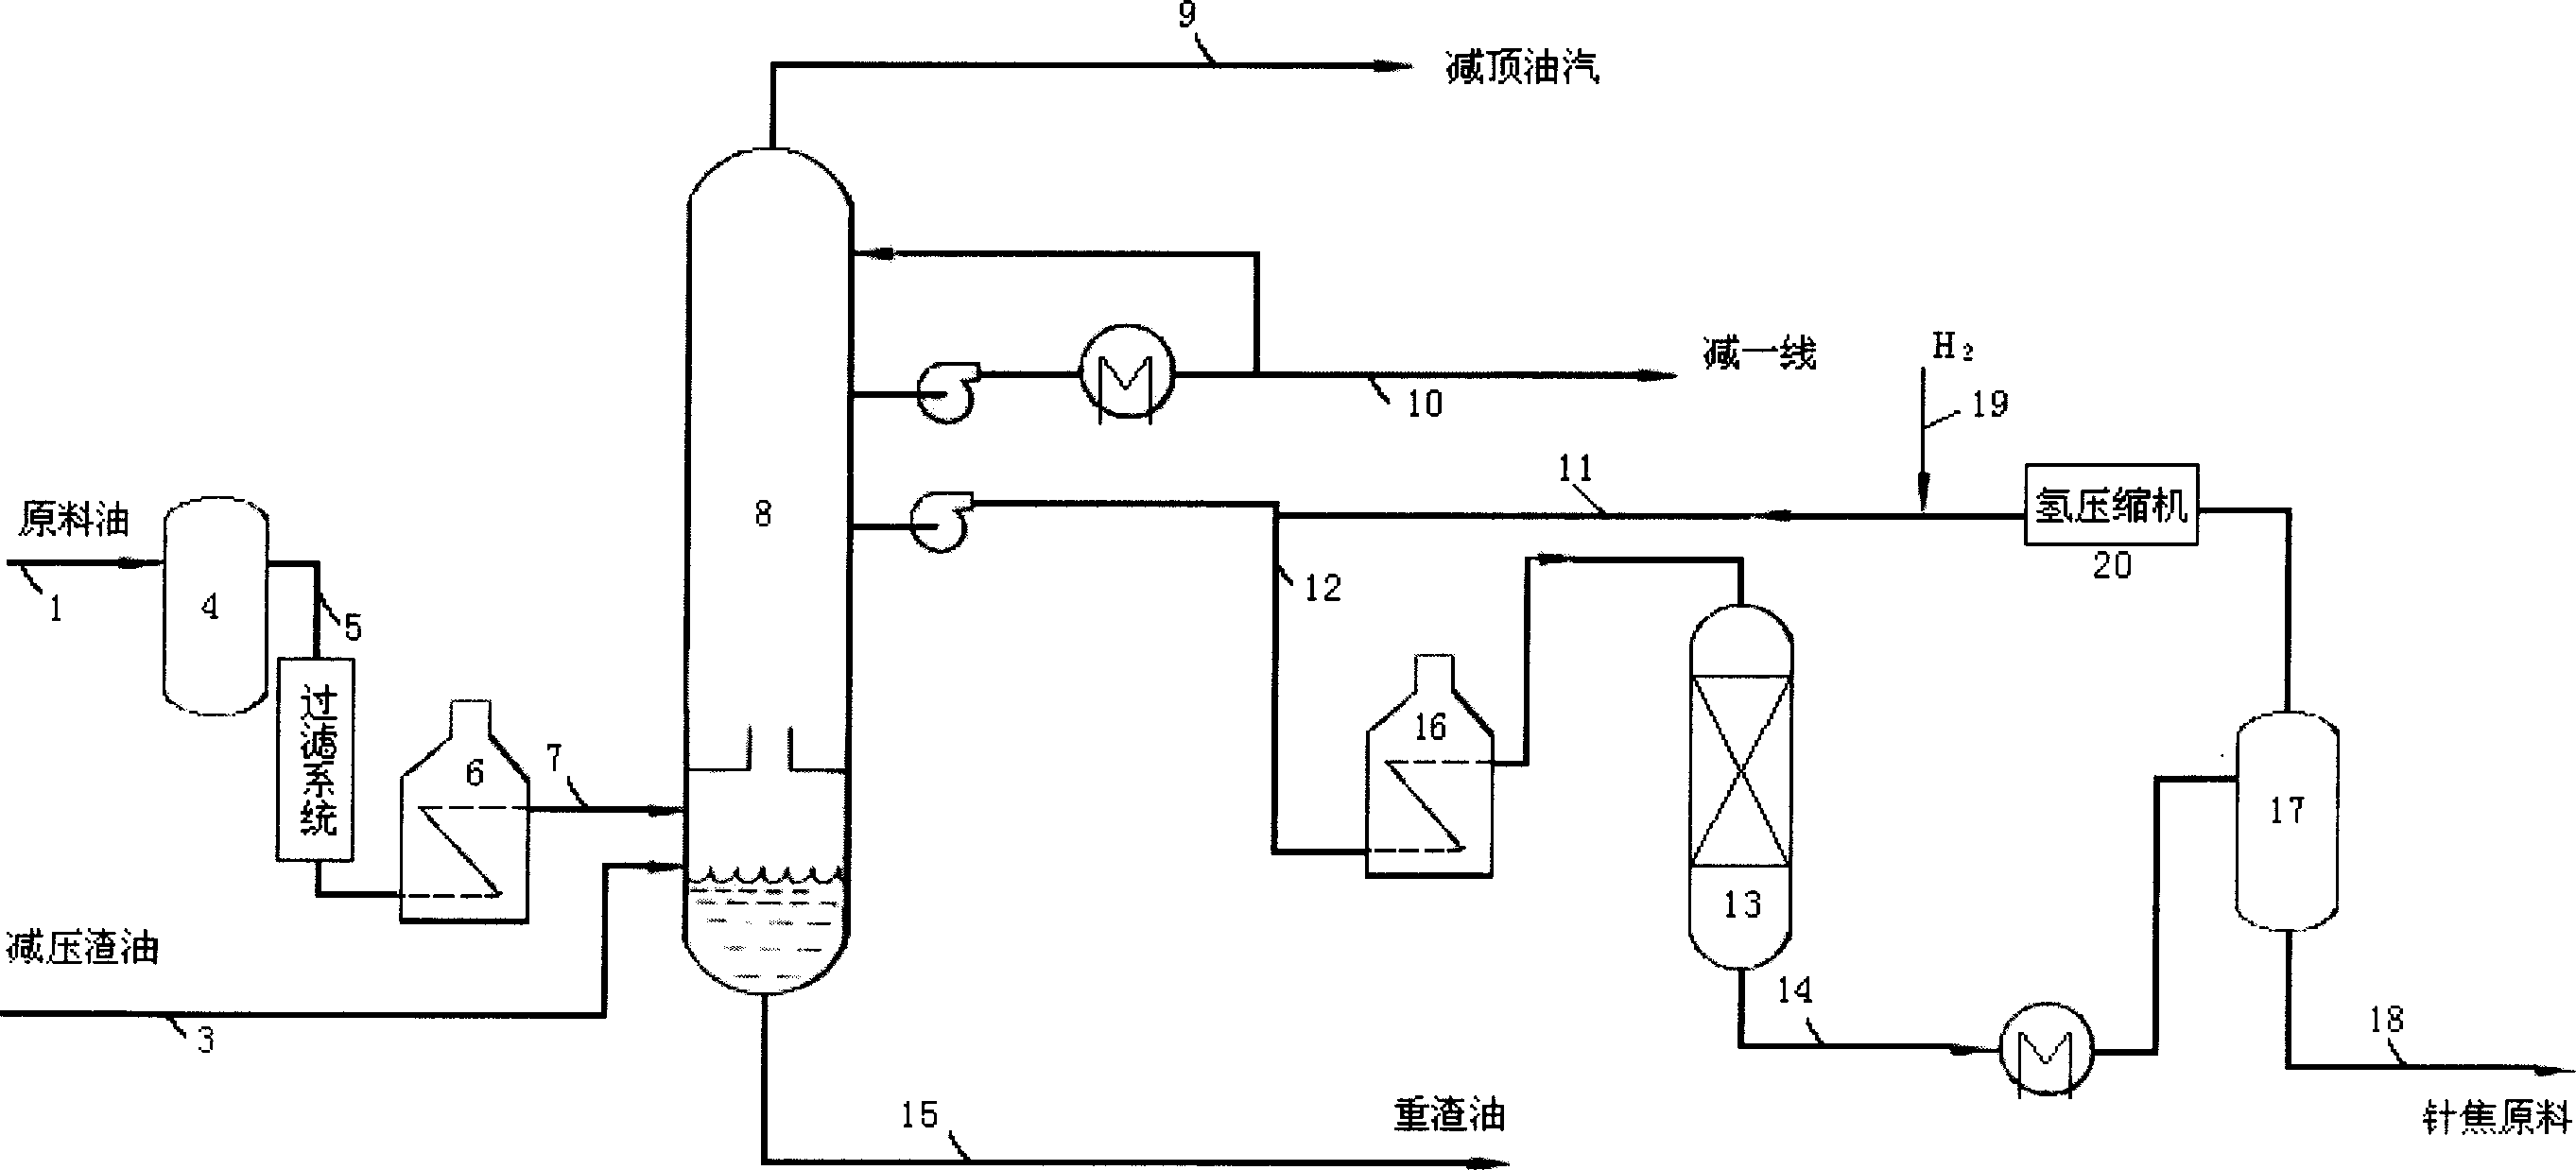 Method of treating raw material for producing acerate coke